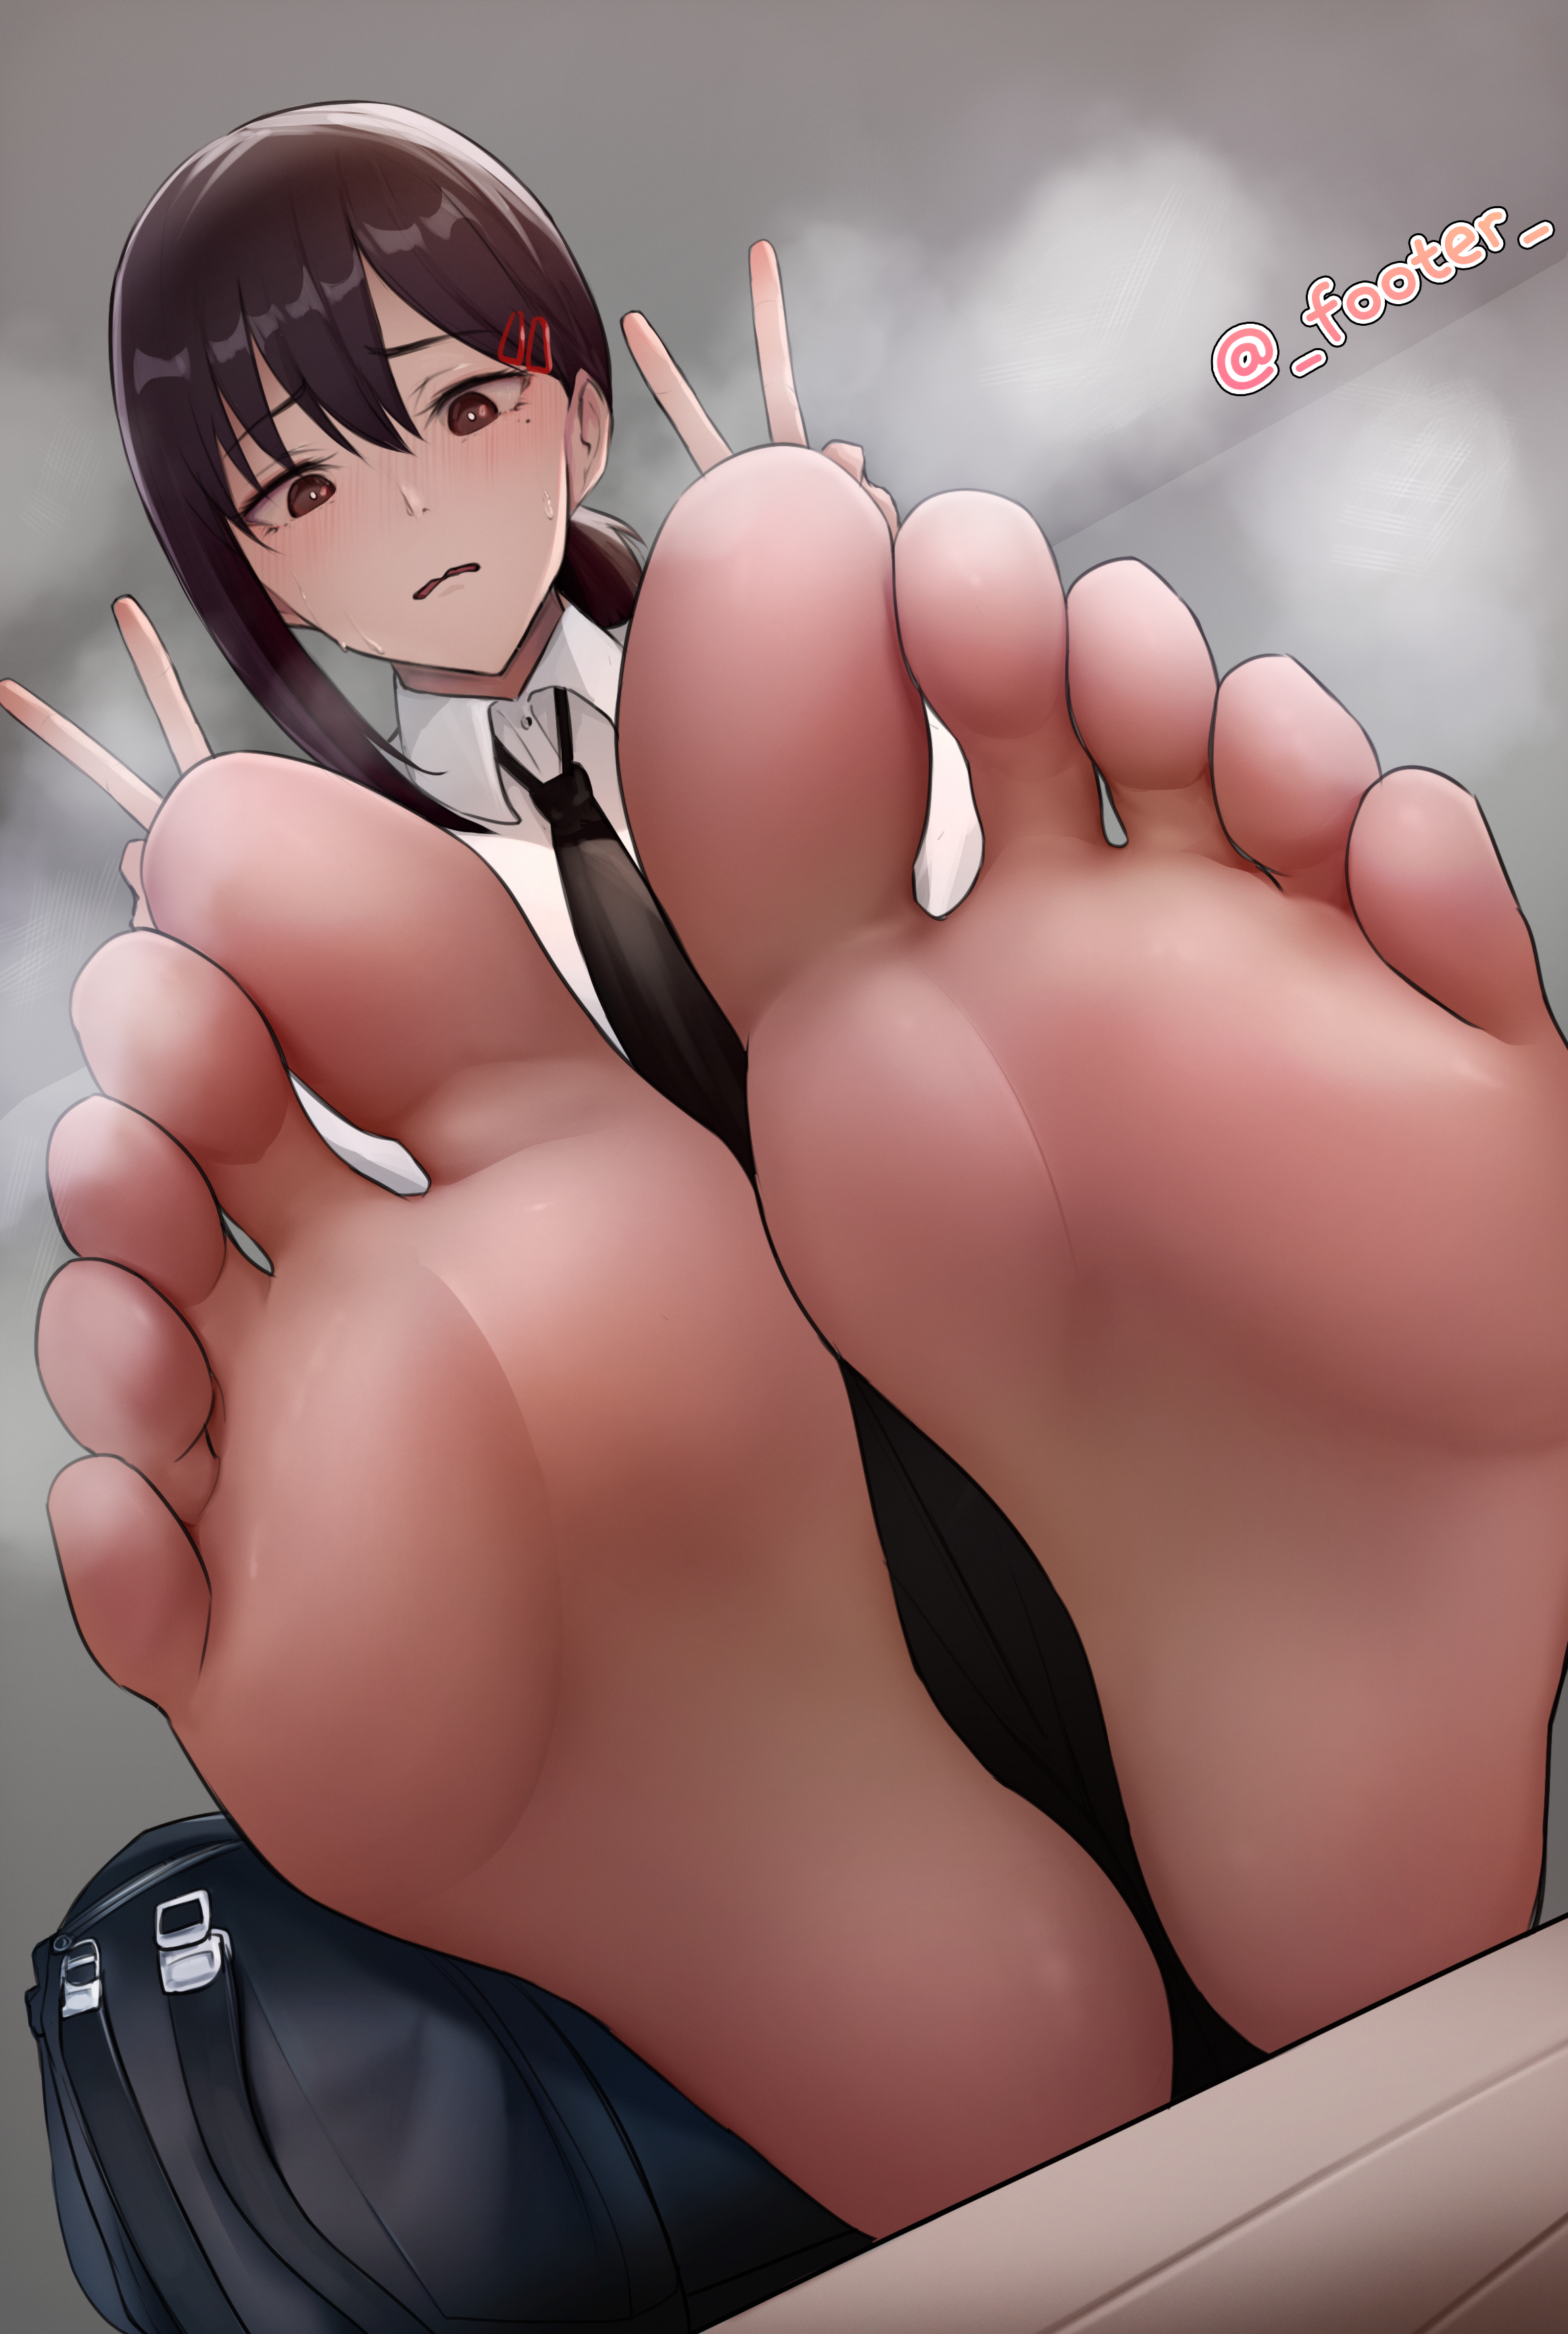 Anime 2320x3453 Kobeni (Chainsaw Man) anime girls Chainsaw Man foot sole foot fetishism feet portrait display peace sign watermarked looking at viewer Unyaaaaan